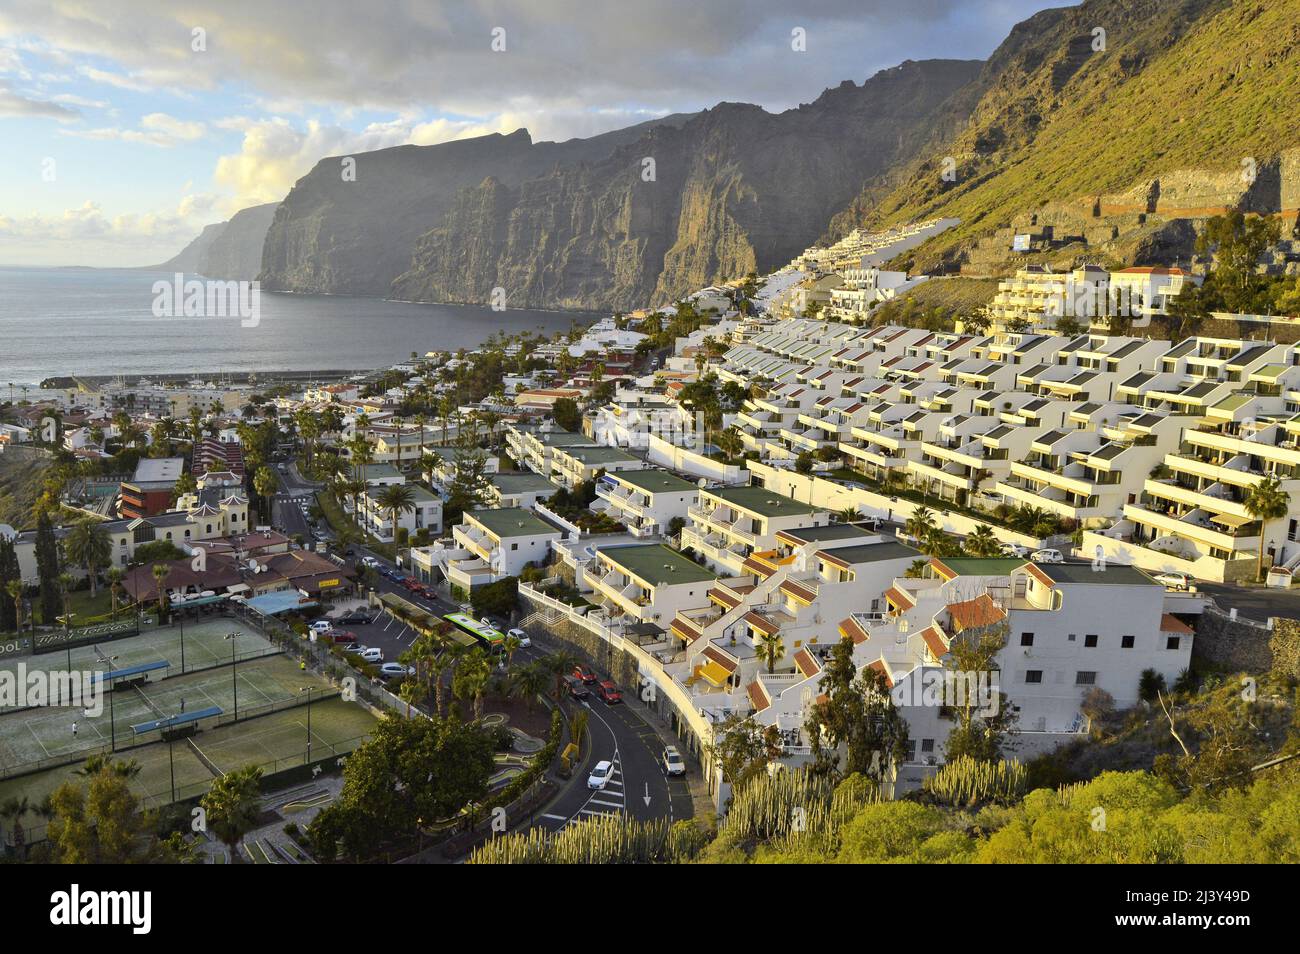 Los Gigantes resort town with modern apartments and Cliffs of Giants in background, northwest of Tenerife Canary Islands Spain. Stock Photo